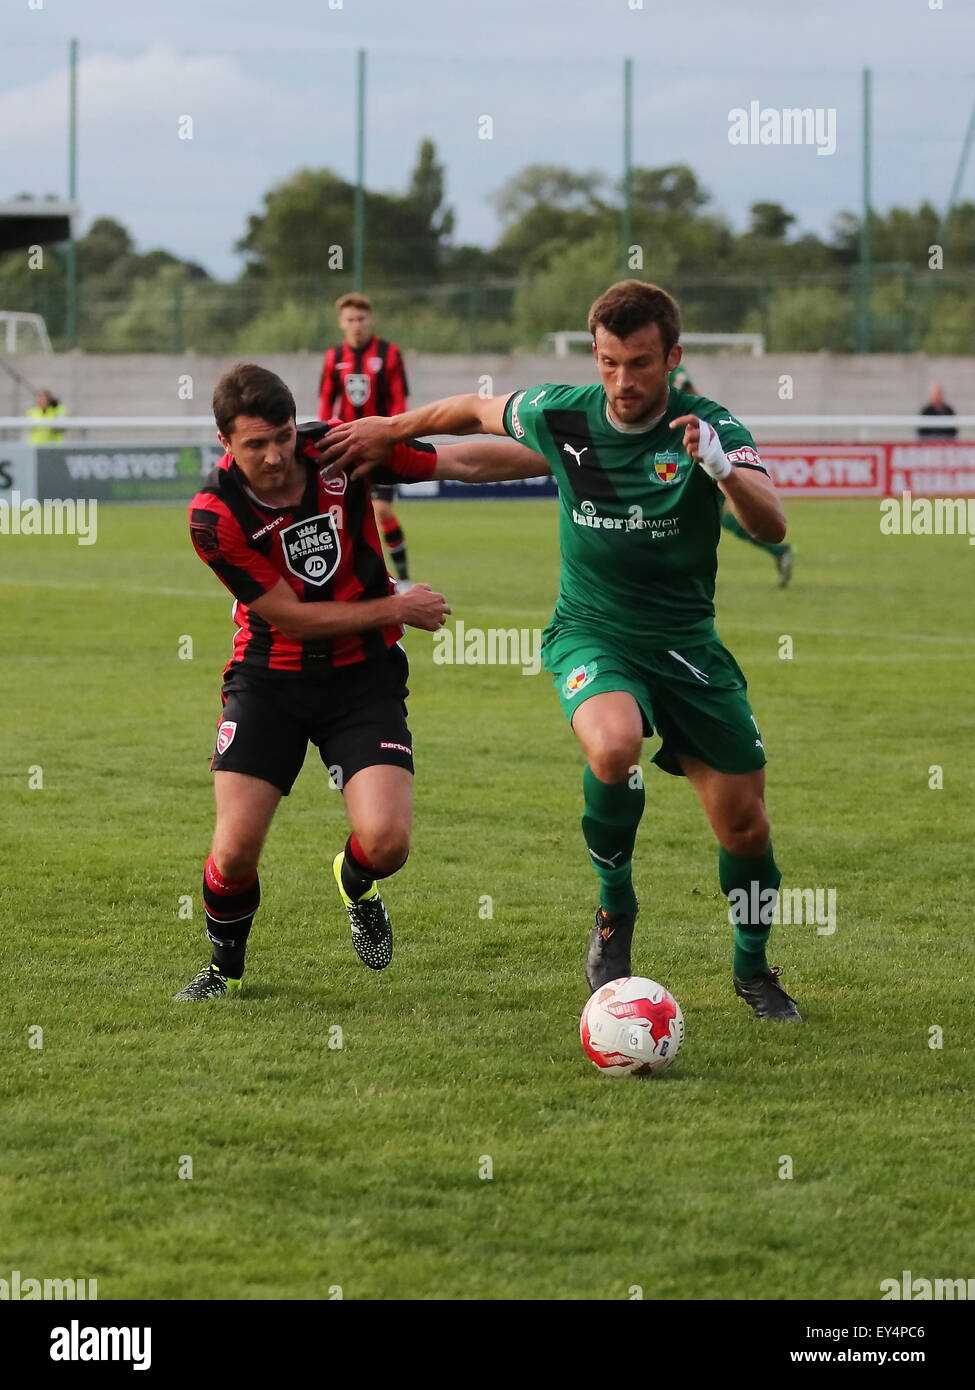 Nantwich, Cheshire, UK. 21st July, 2015. Nantwich Town entertain League Two Morecambe in a pre season friendly at The Weaver Stadium. Morecambe ran out 6-0 victors. Nantwich Town's Sam Hall on the ball. Credit:  SJN/Alamy Live News Stock Photo